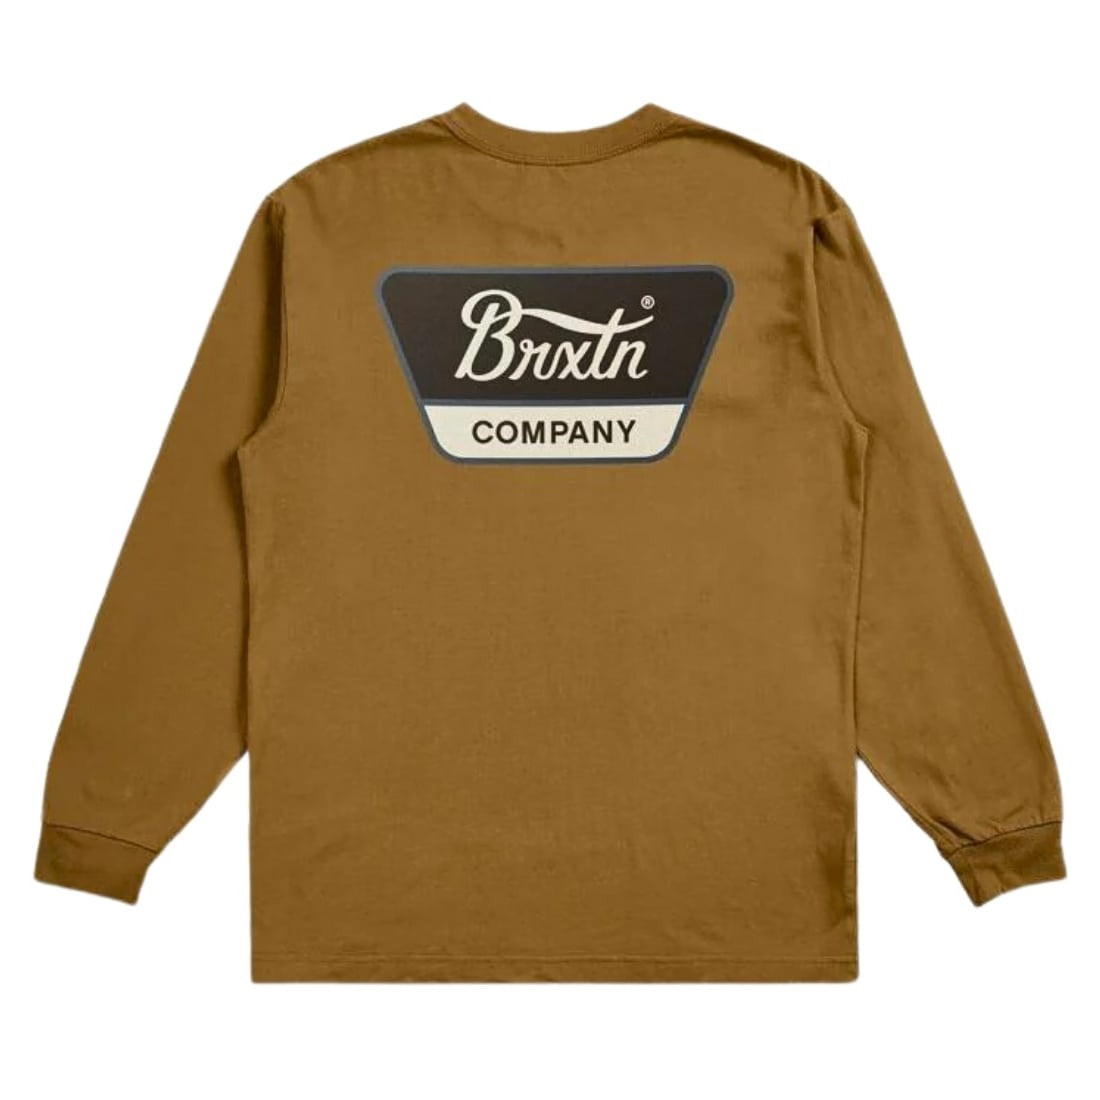 Brixton Linwood Longsleeve T-Shirt - Golden Brown/Washed Black/Off White - Mens Graphic T-Shirt by Brixton